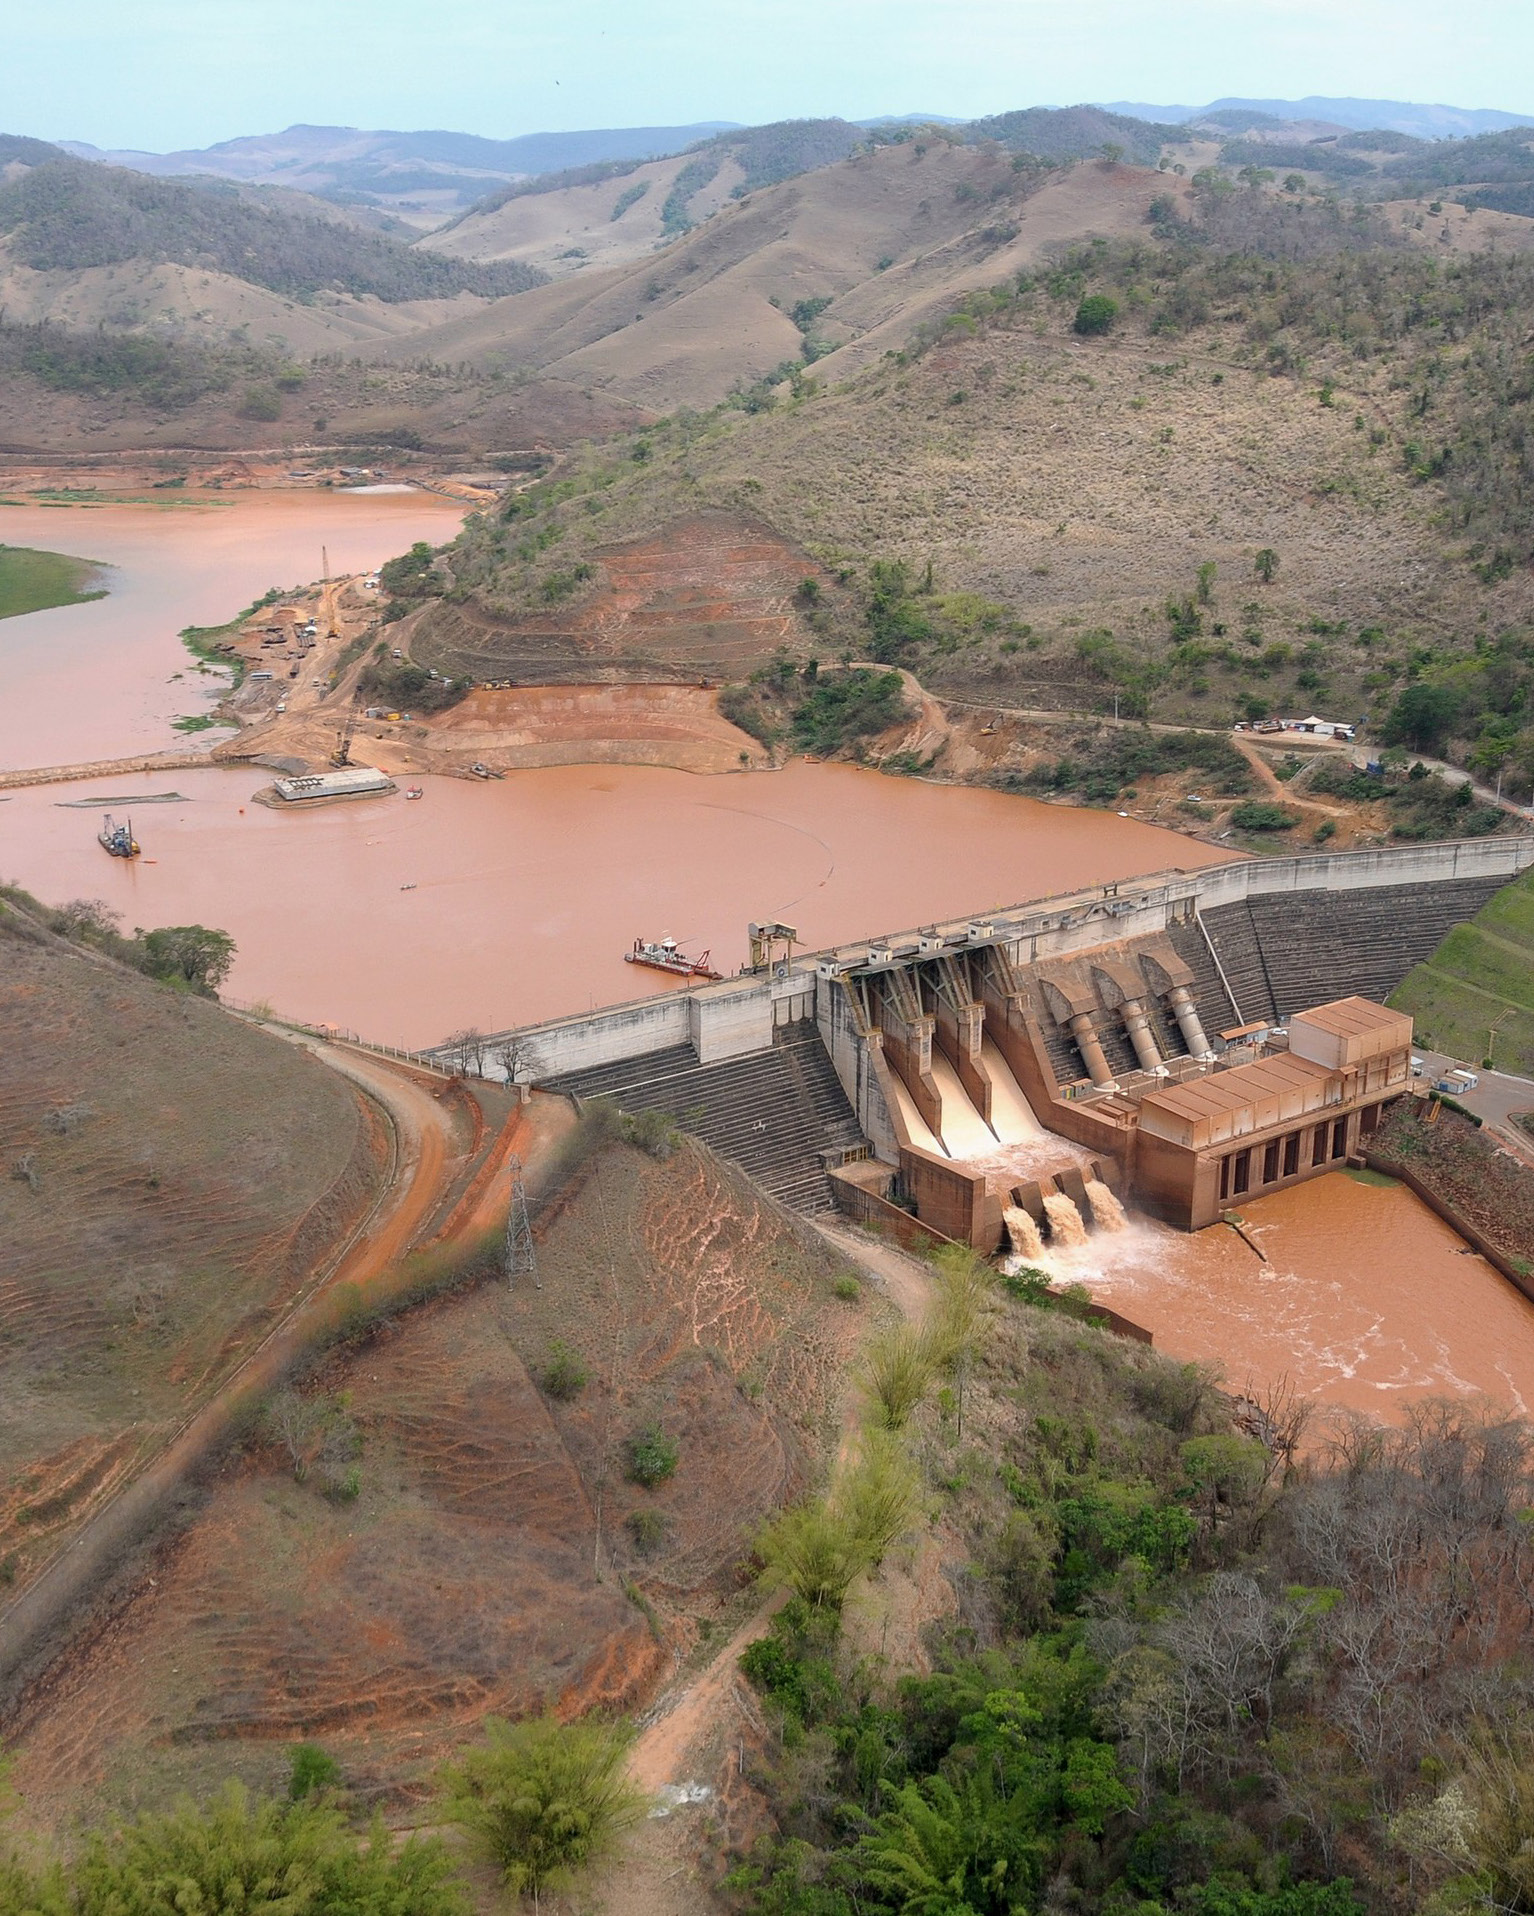 Aerial photo of the area affected by a dam breaking in Mariana, Minas Gerais (Source: Vinícius Mendonça/IBAMA Brazil, 2017, CC BY 2.0, via Wikimedia Commons).